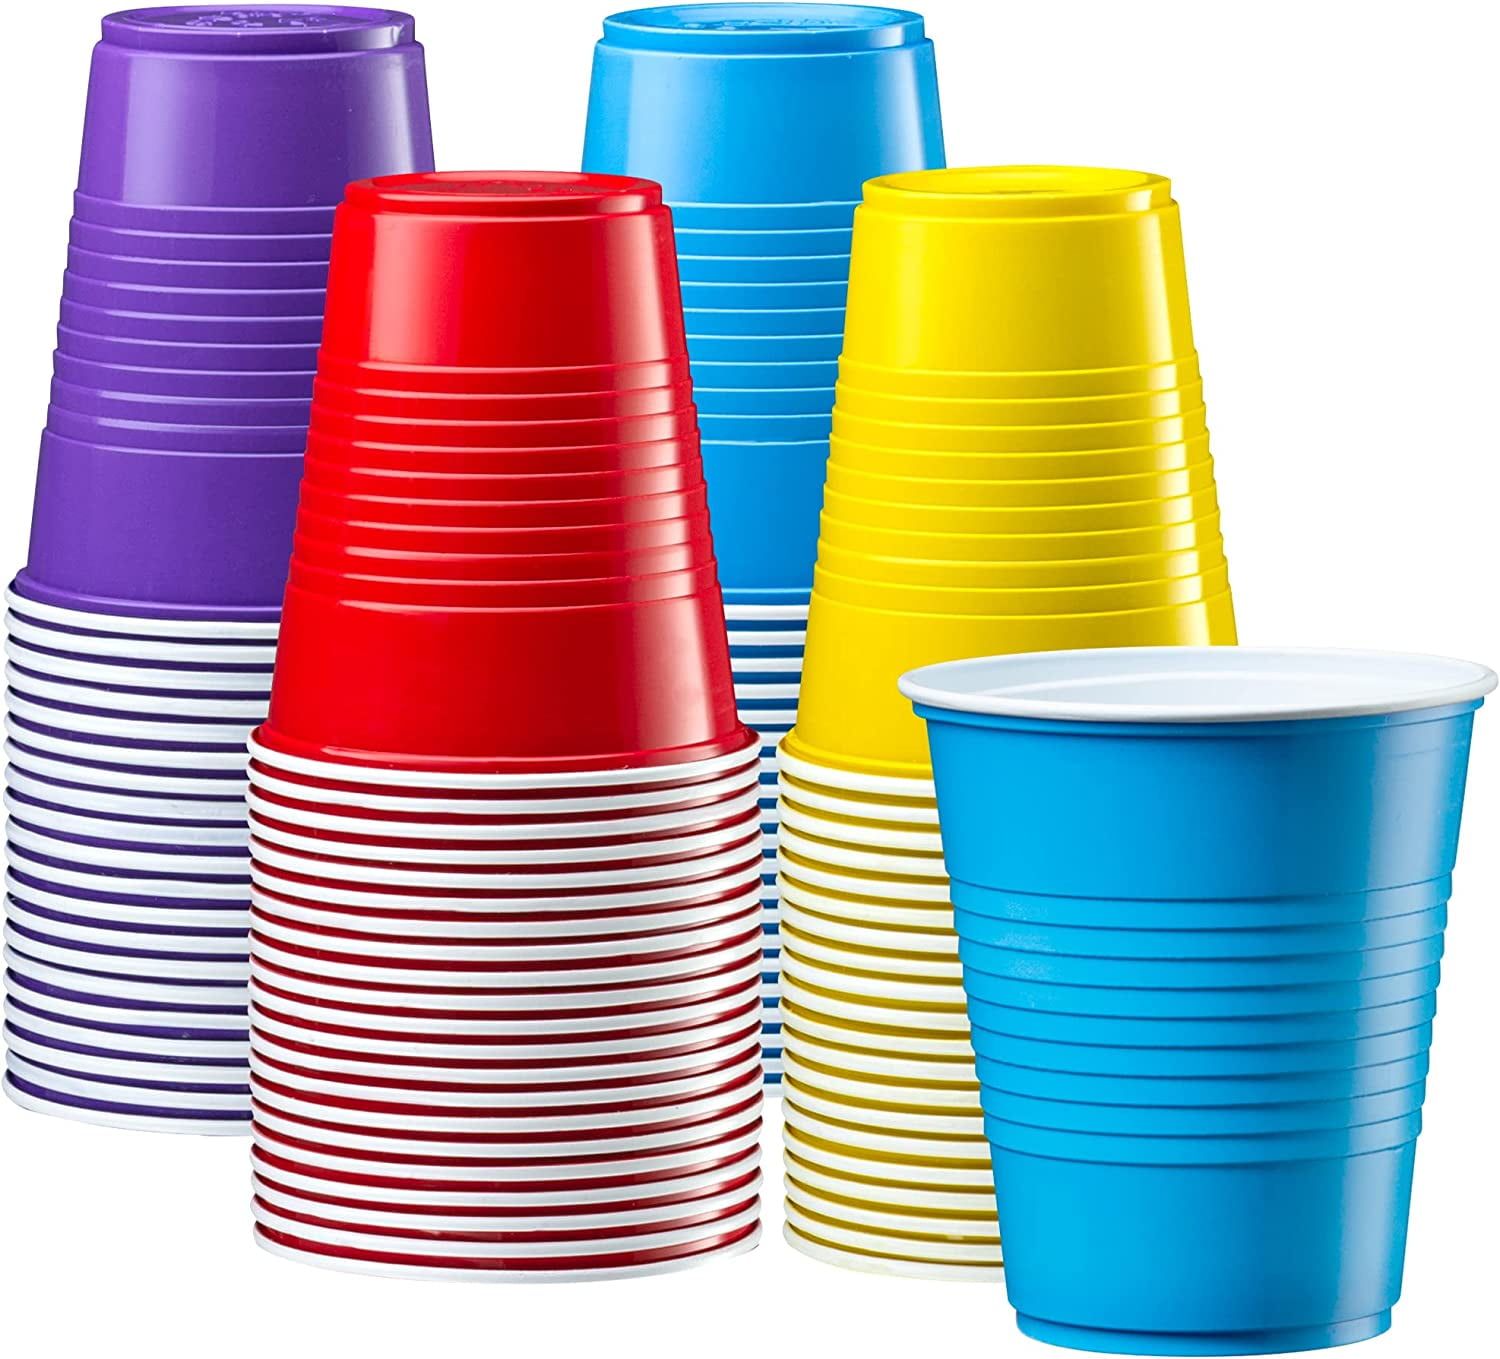 Disposable Party Plastic Cups [40 Pack - 12 oz.] Red Drinking Cups